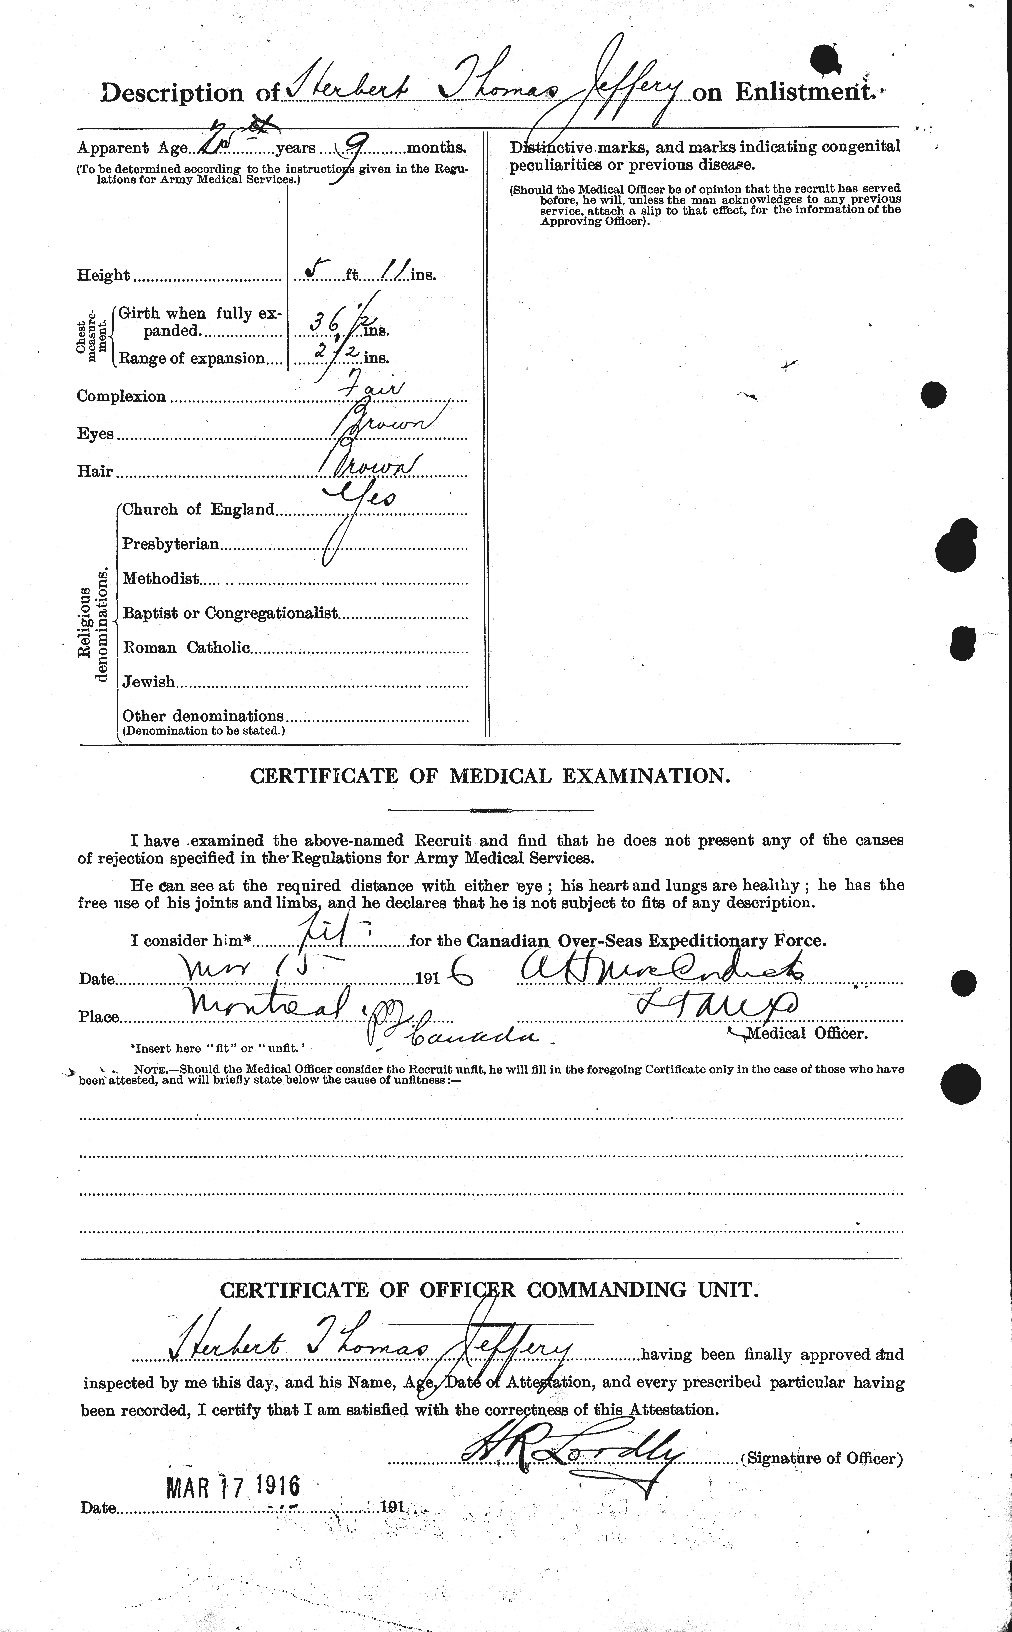 Personnel Records of the First World War - CEF 417765b